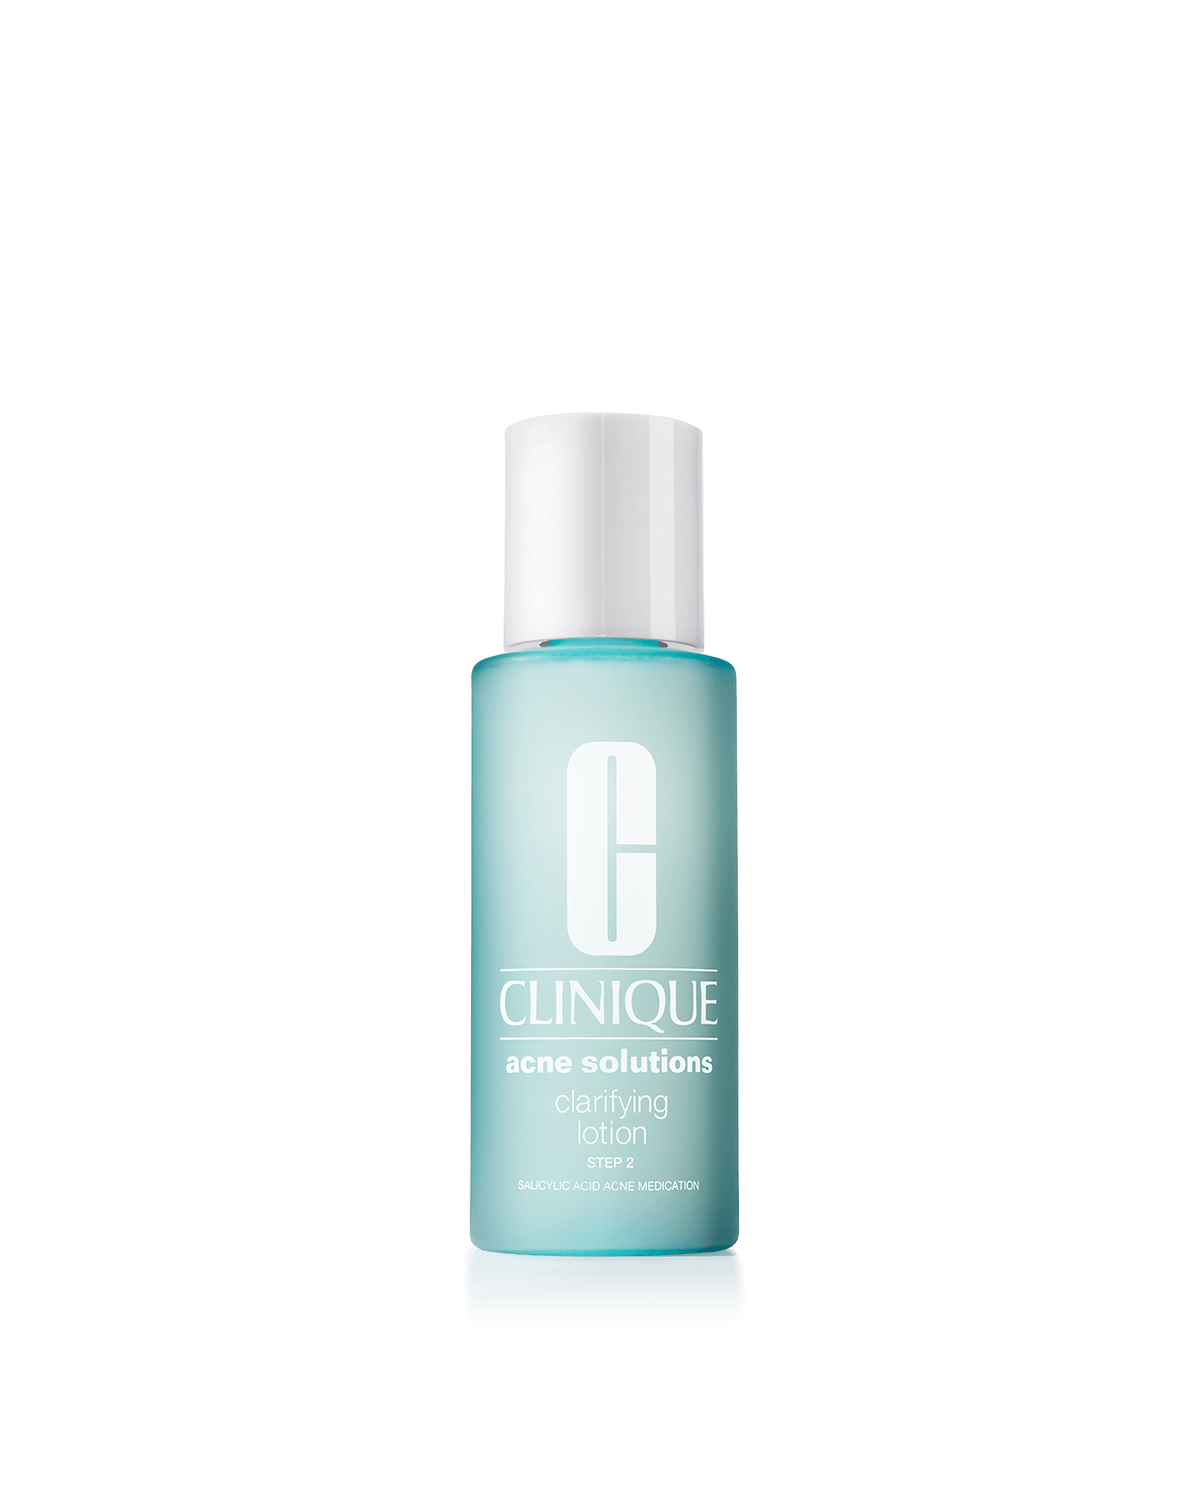 Acne Solutions™ Clarifying Lotion